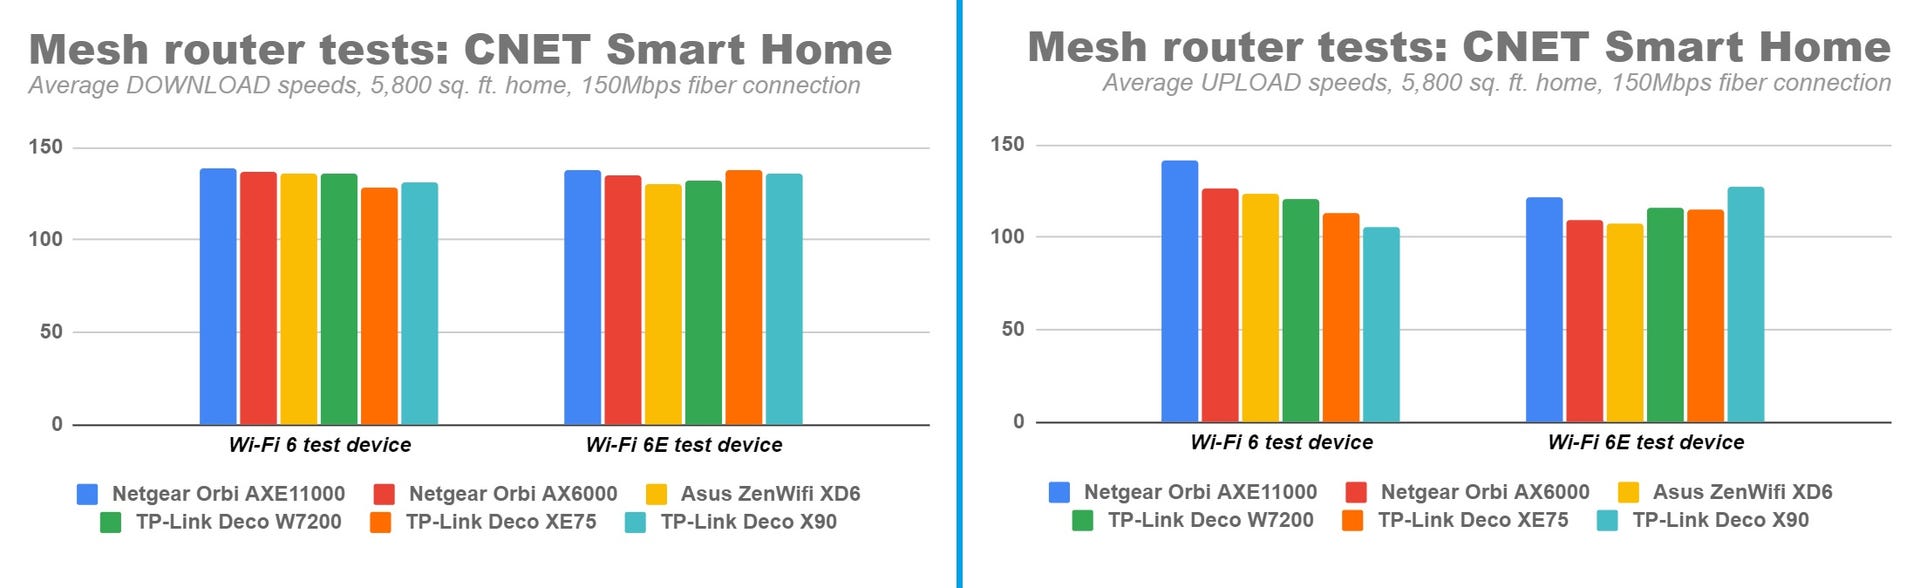 cnet-smart-home-mesh-router-download-and-upload-speeds